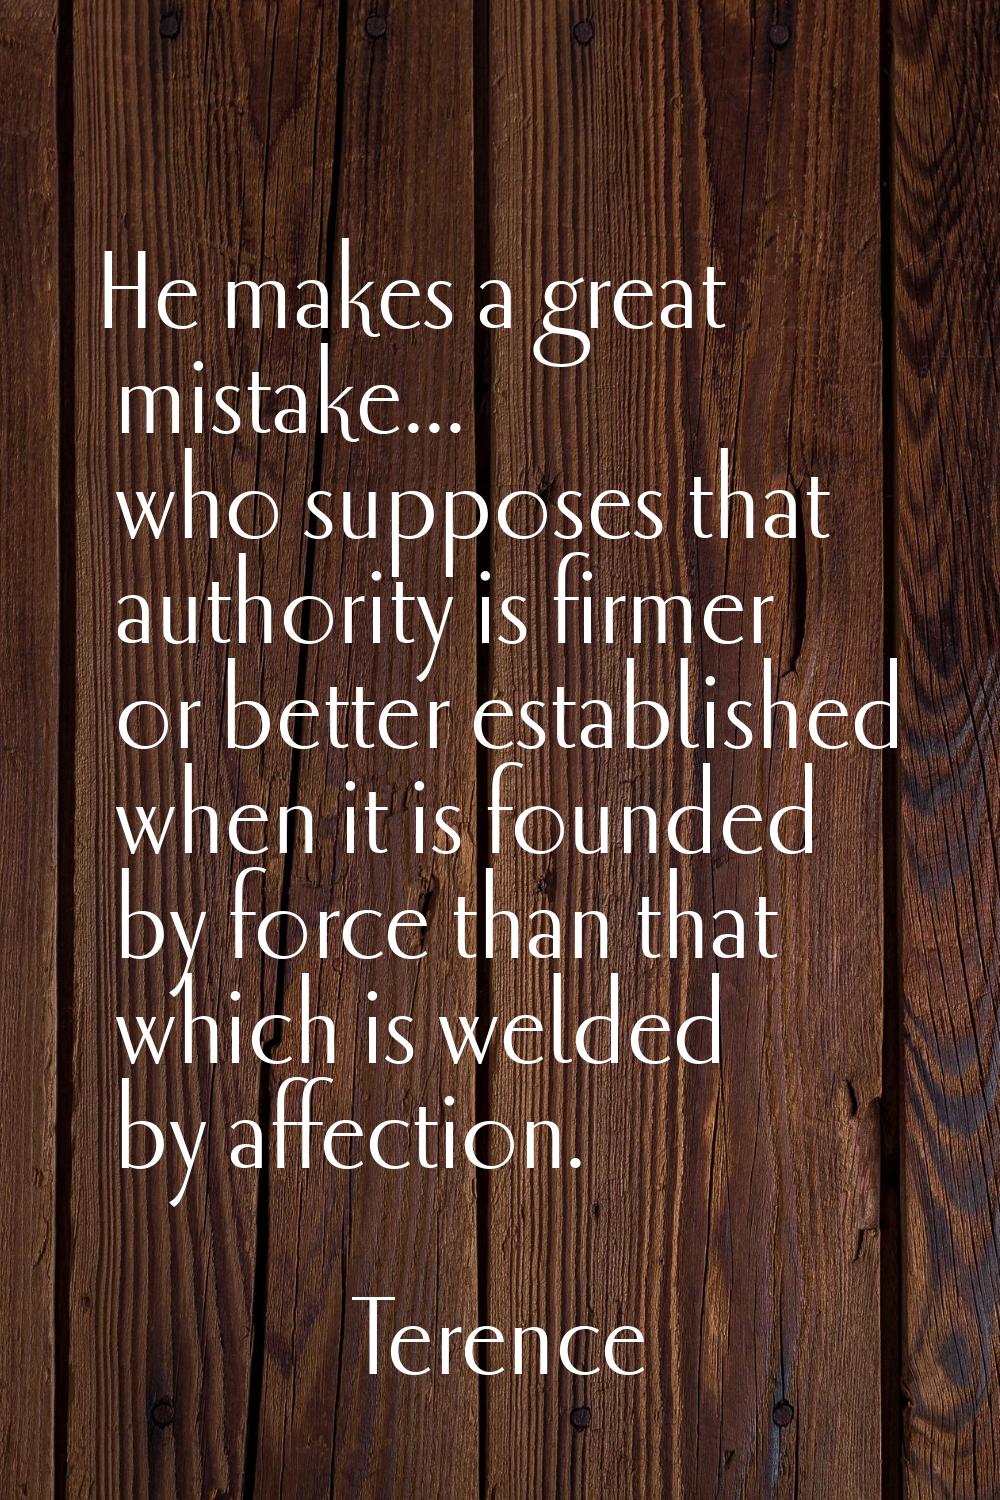 He makes a great mistake... who supposes that authority is firmer or better established when it is 